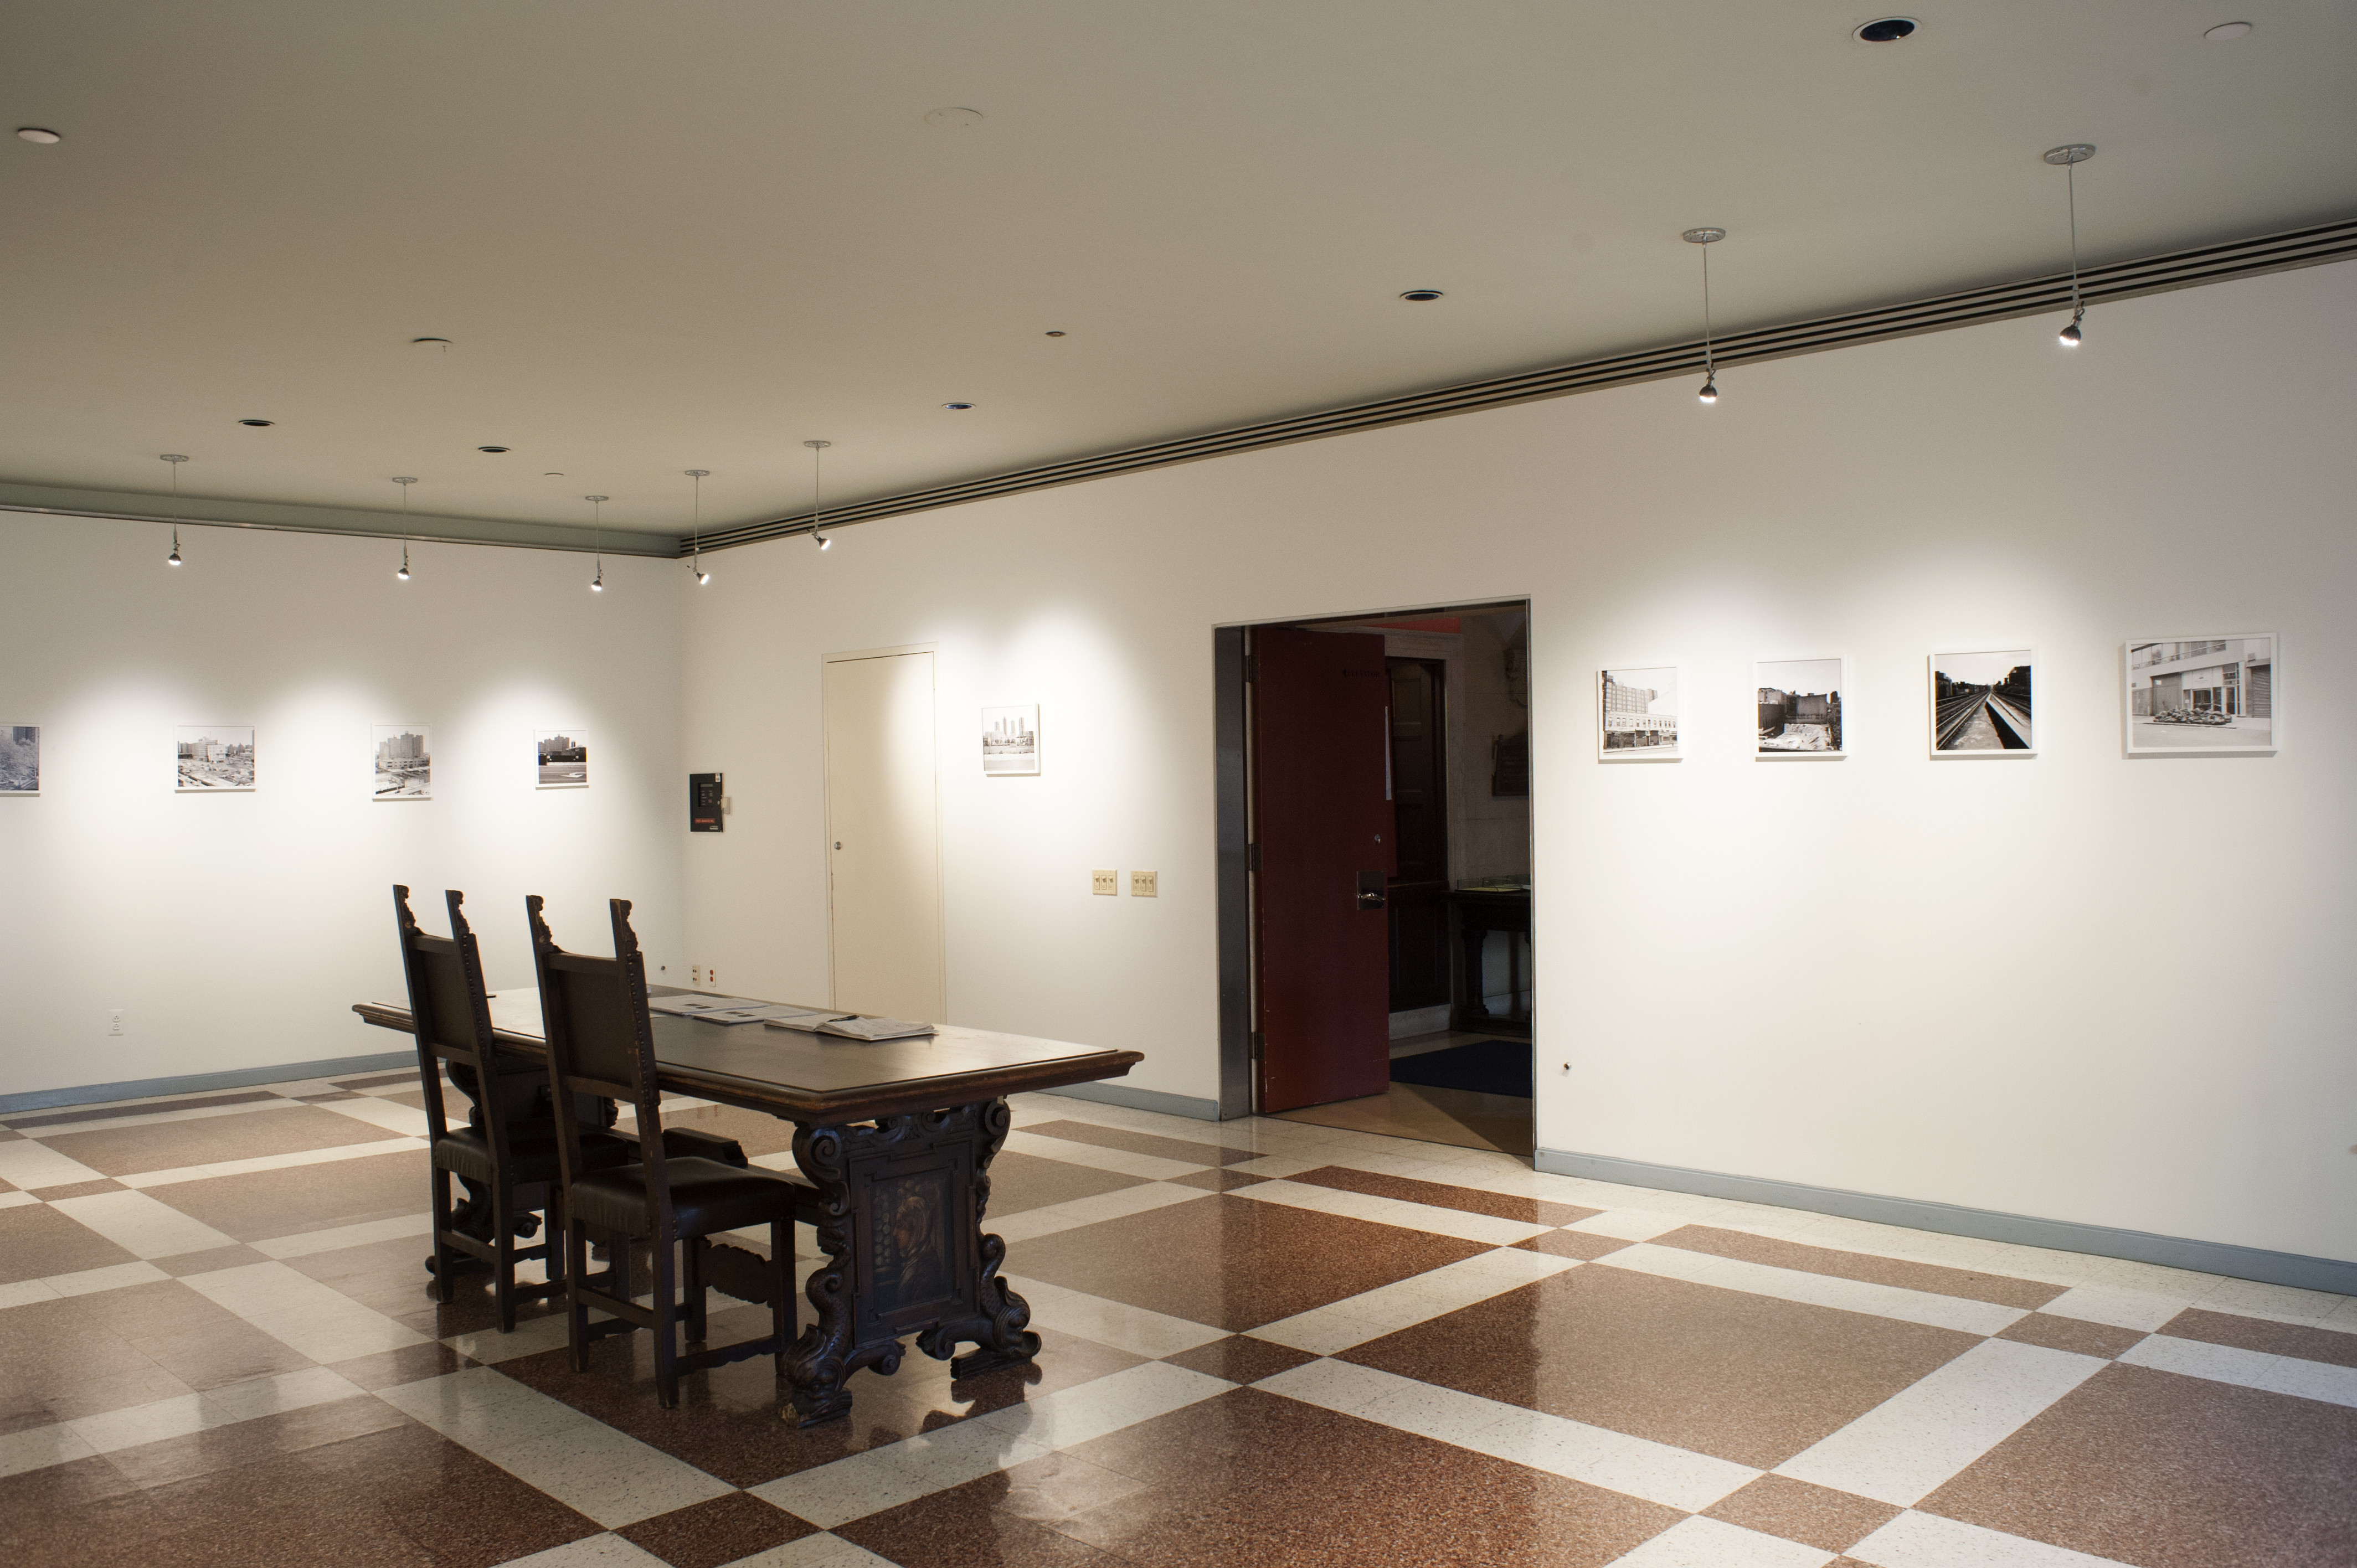 Photo of an exhibition space with photographs hung on the wall